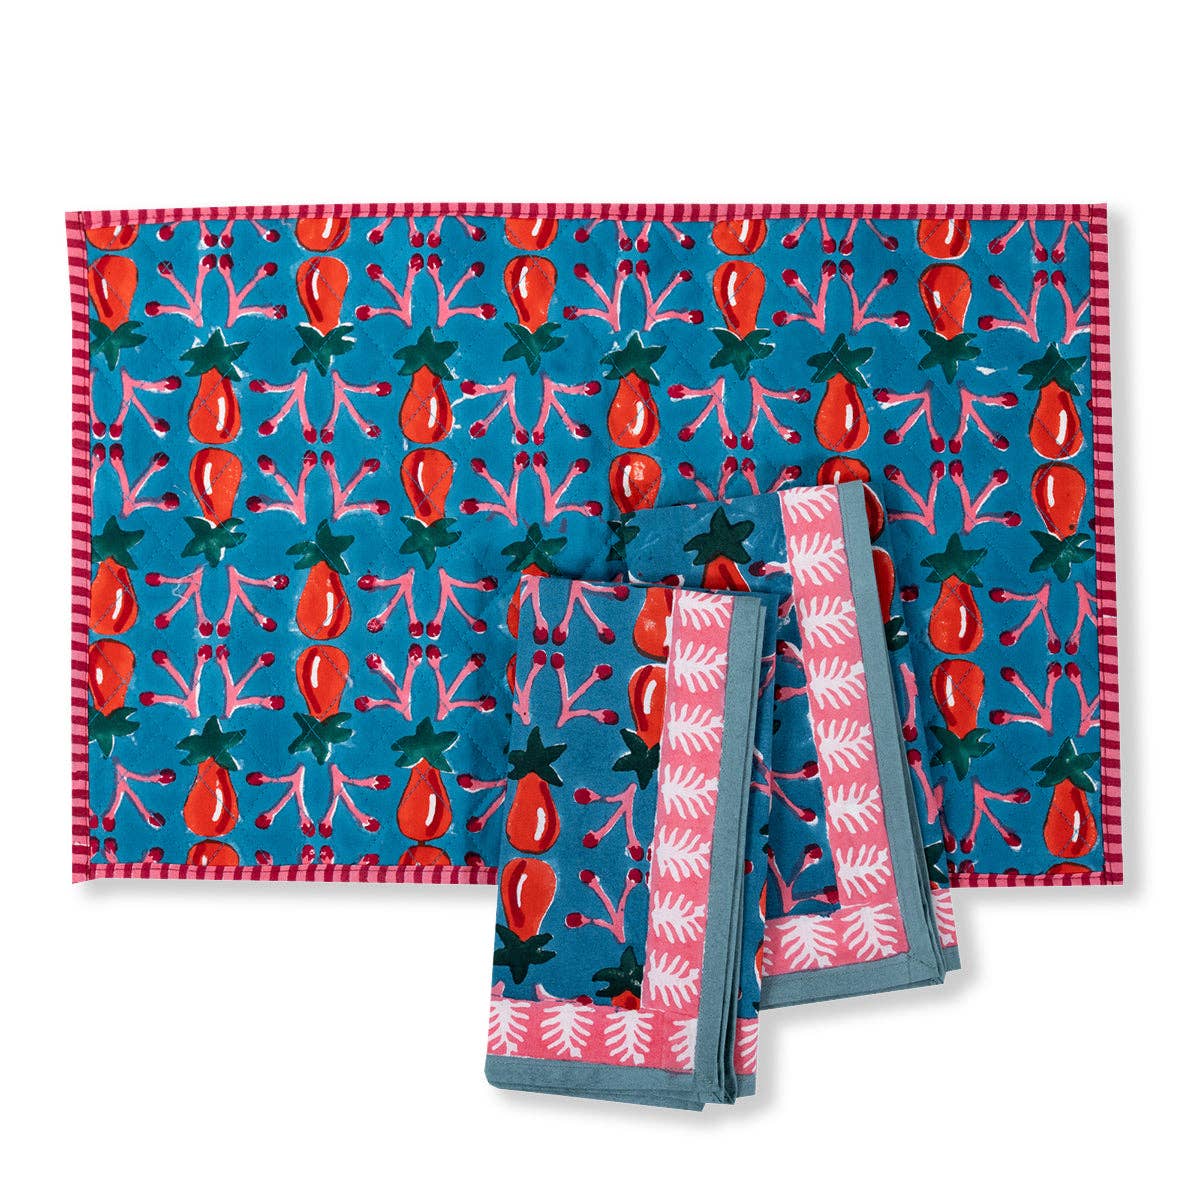 The Every Space 100% cotton placemats in red and blue Wilshire blockprint by Furbish studio, handmade in India